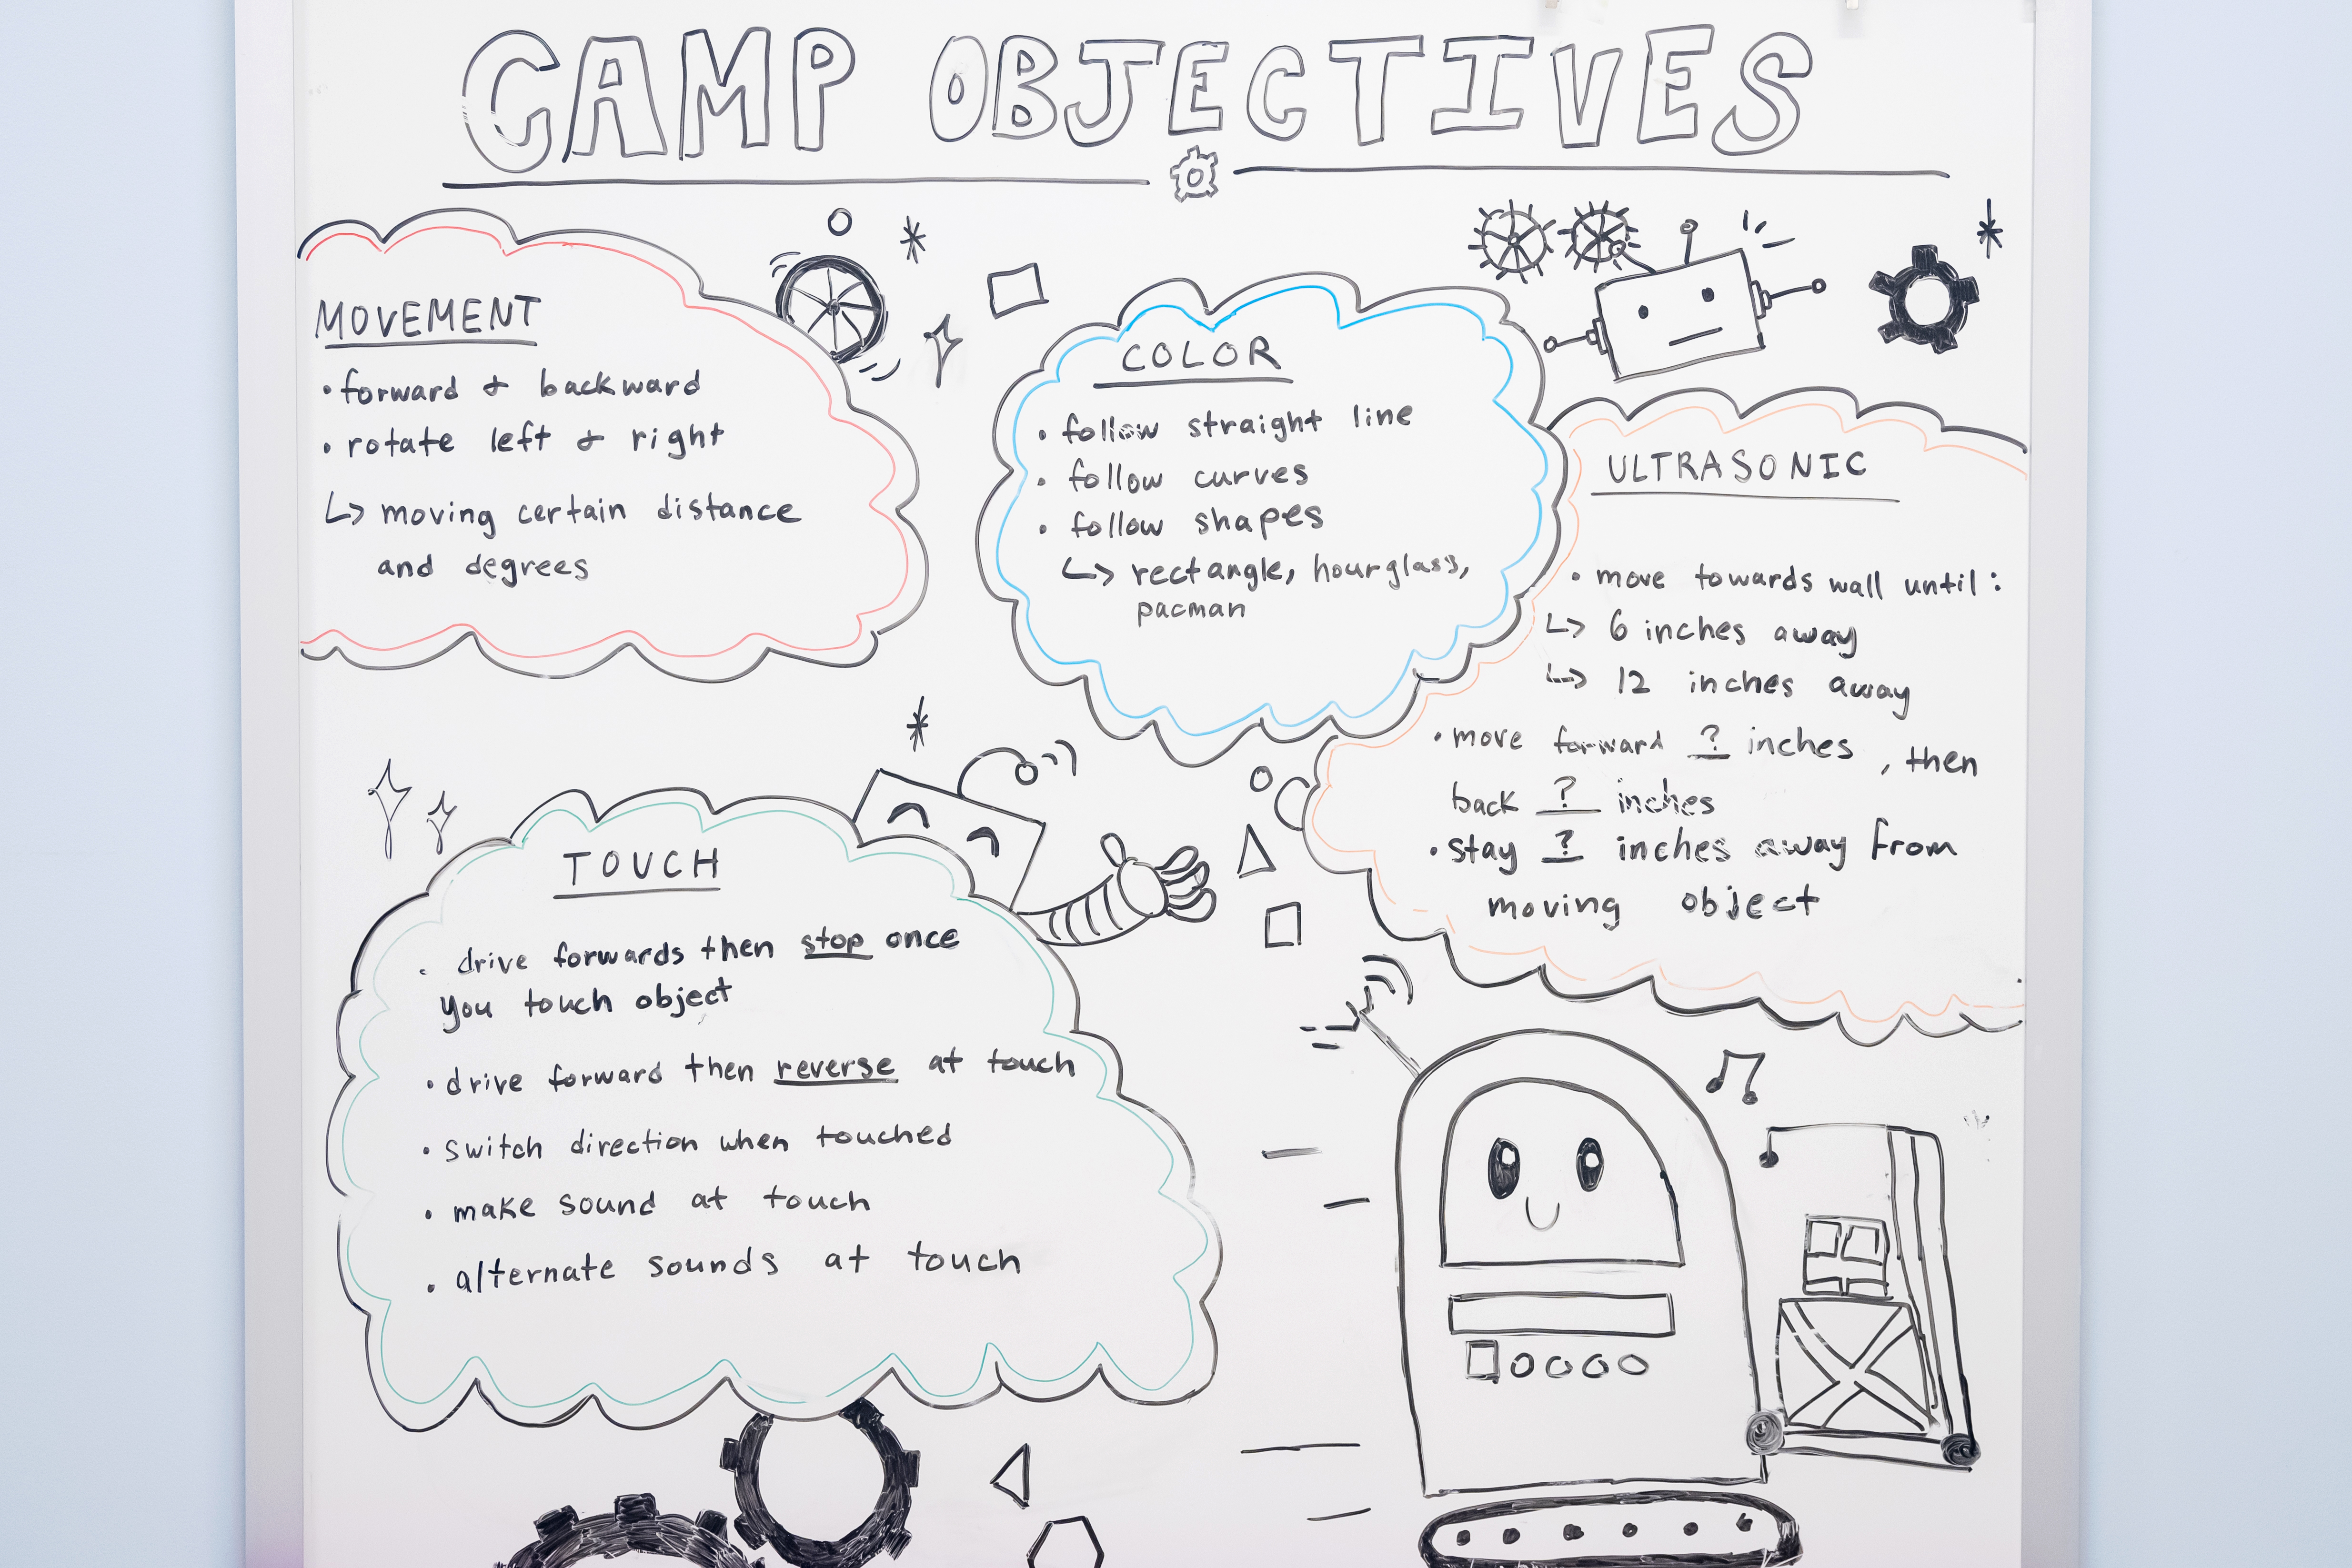 A whiteboard lists the objectives for students to learn during the robotics camp,  including various programming goals, from movement to the use of color and touch sensors.